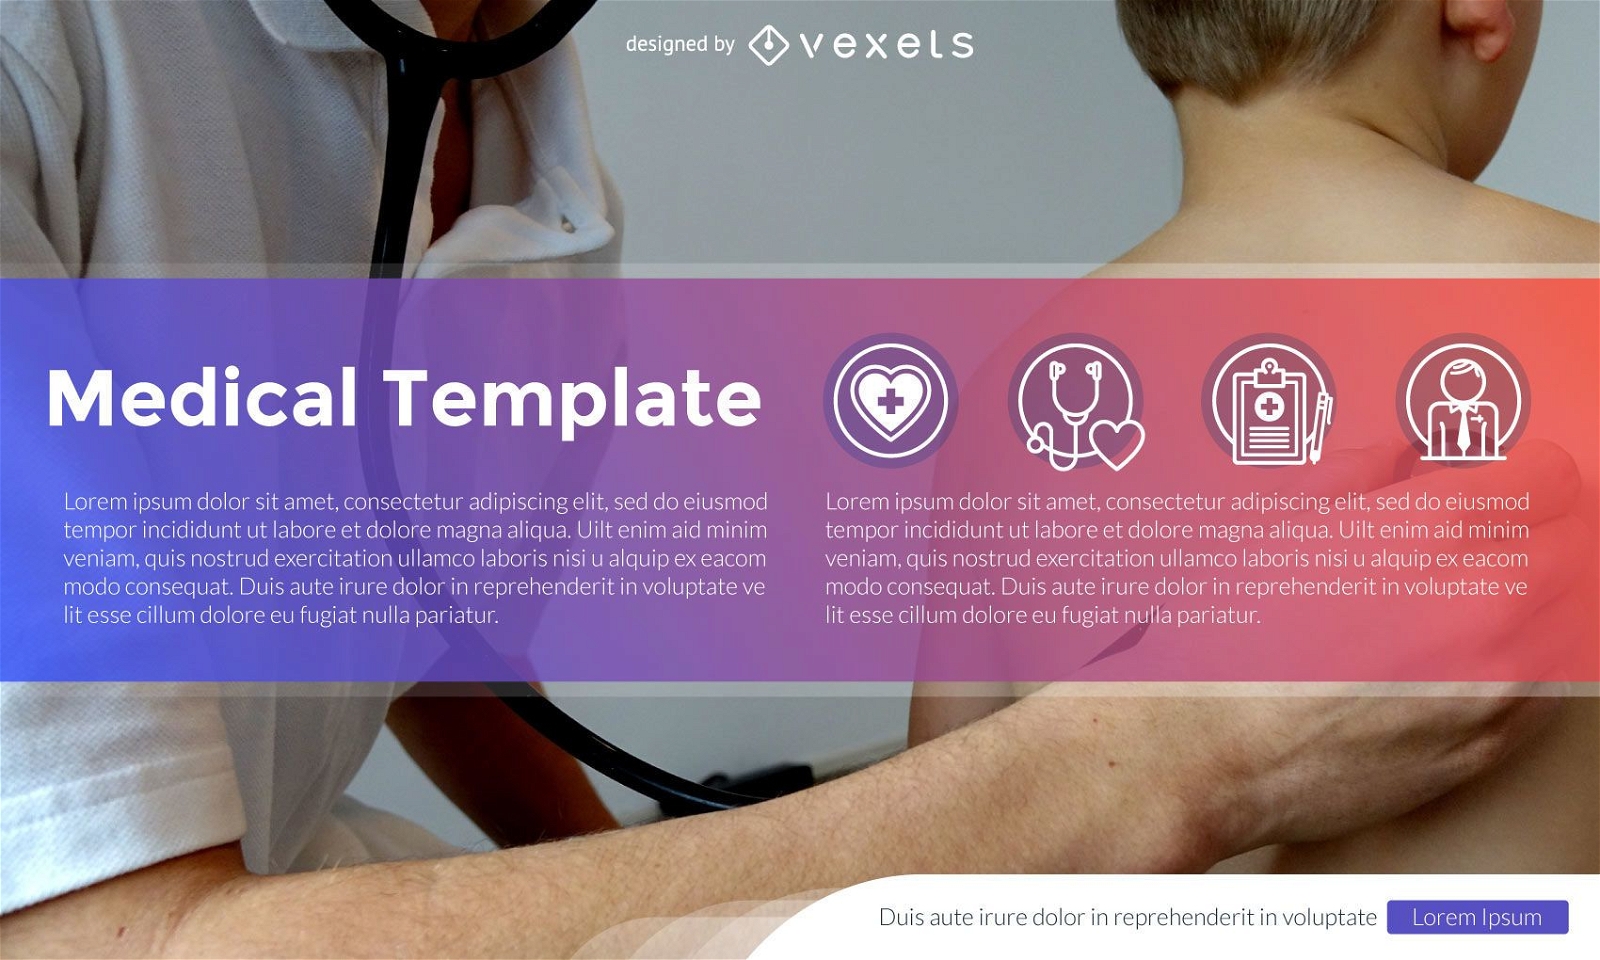 Healthcare and medicine template design with icons